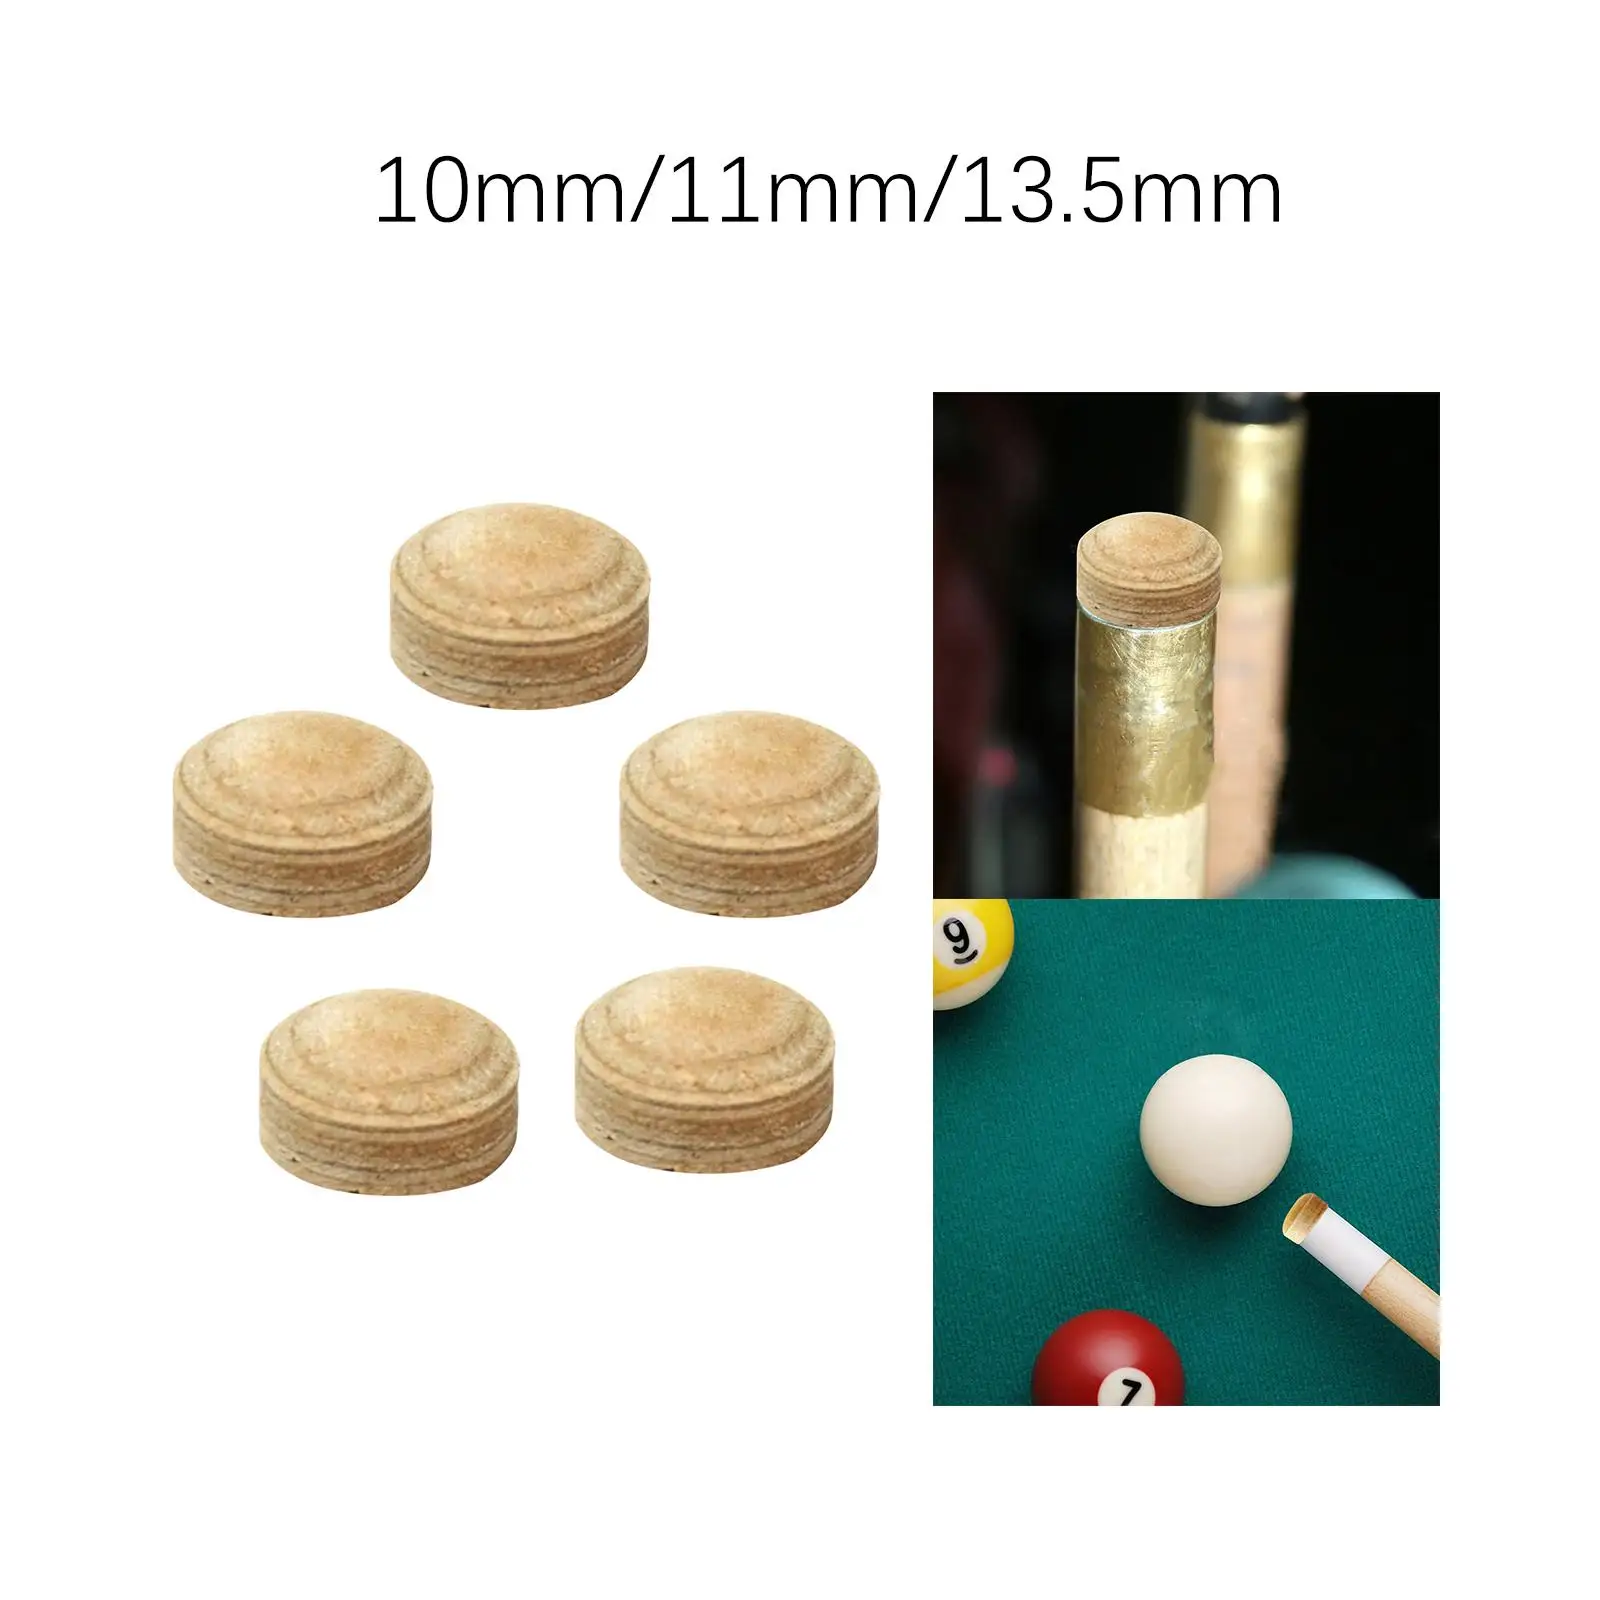 5 Pieces Billiard Cue Tips 9 Balls, 8 Balls Multiple Layer End Tips Pool Cue Stick Tips for Personal Use Home Billiards Room